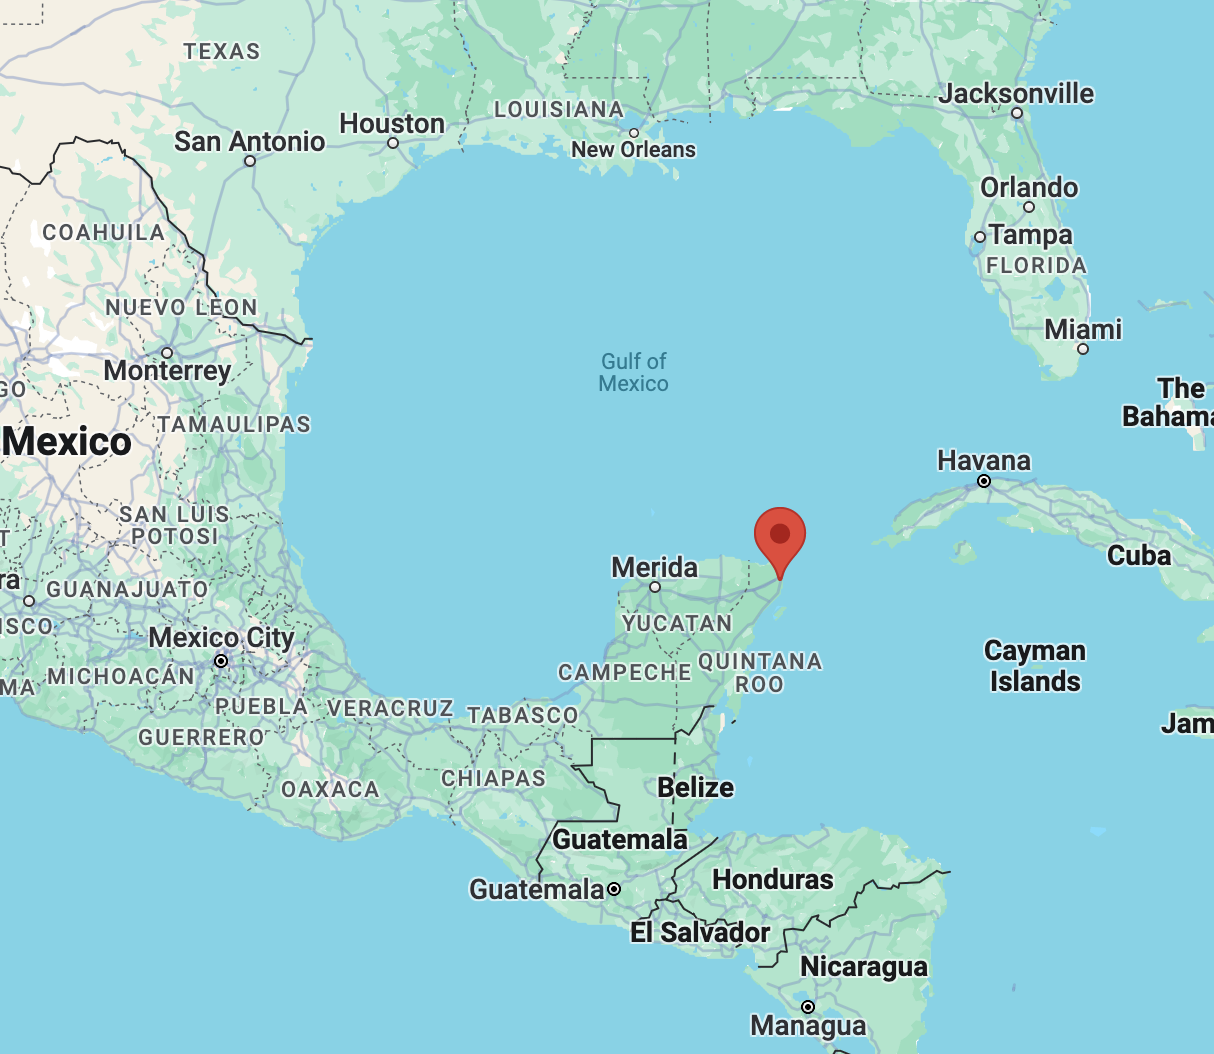 A map showing the location of Cancun, Mexico. The city lies at northeastern tip of the Yucatan Peninsula.